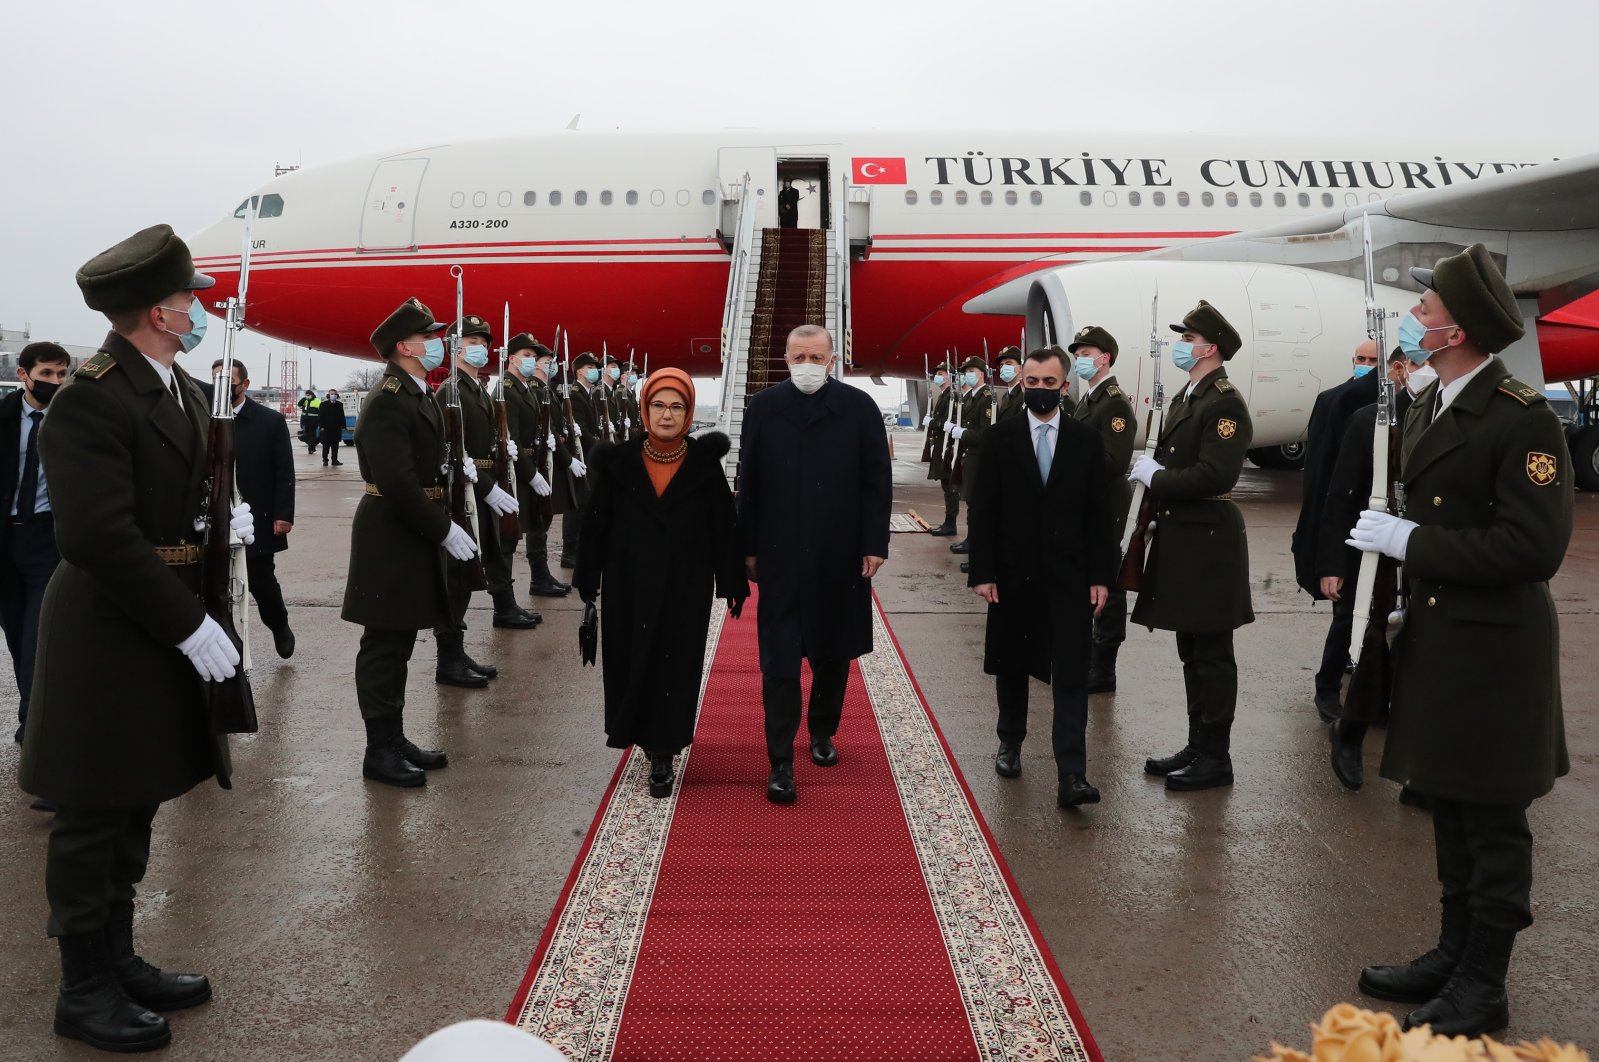 President Recep Tayyip Erdoğan and first lady Emine Erdoğan are seen during the welcoming ceremony at the Ukrainian capital Kyiv, where they visited as part of an official visit, Feb. 3, 2022. (AA Photo)